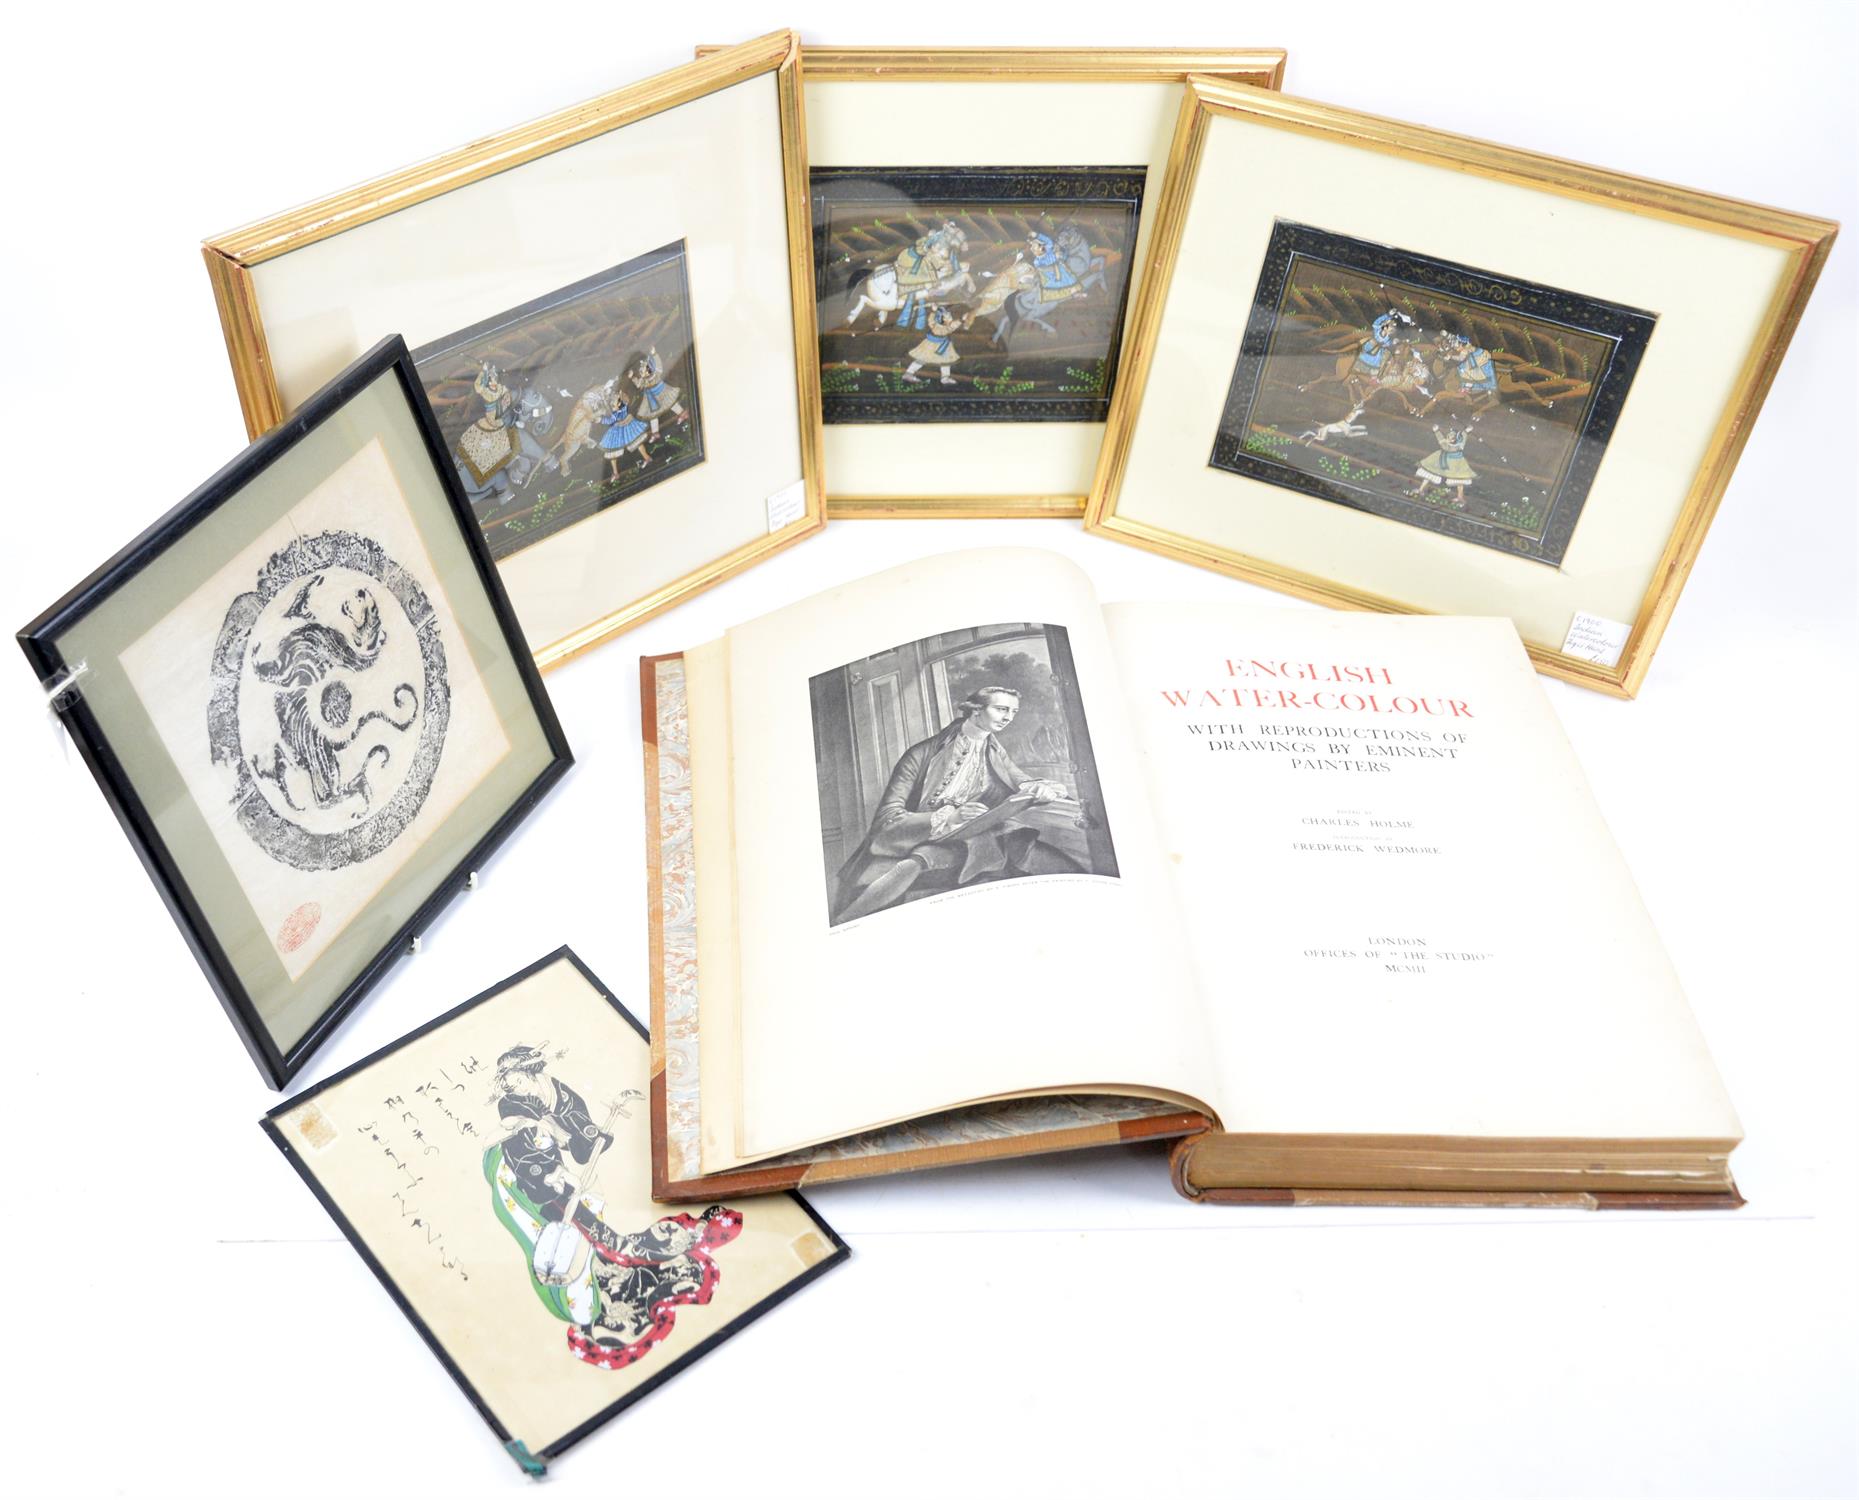 English Water-colour, with reproductions of drawings by eminent painters, edited by Charles Holme,